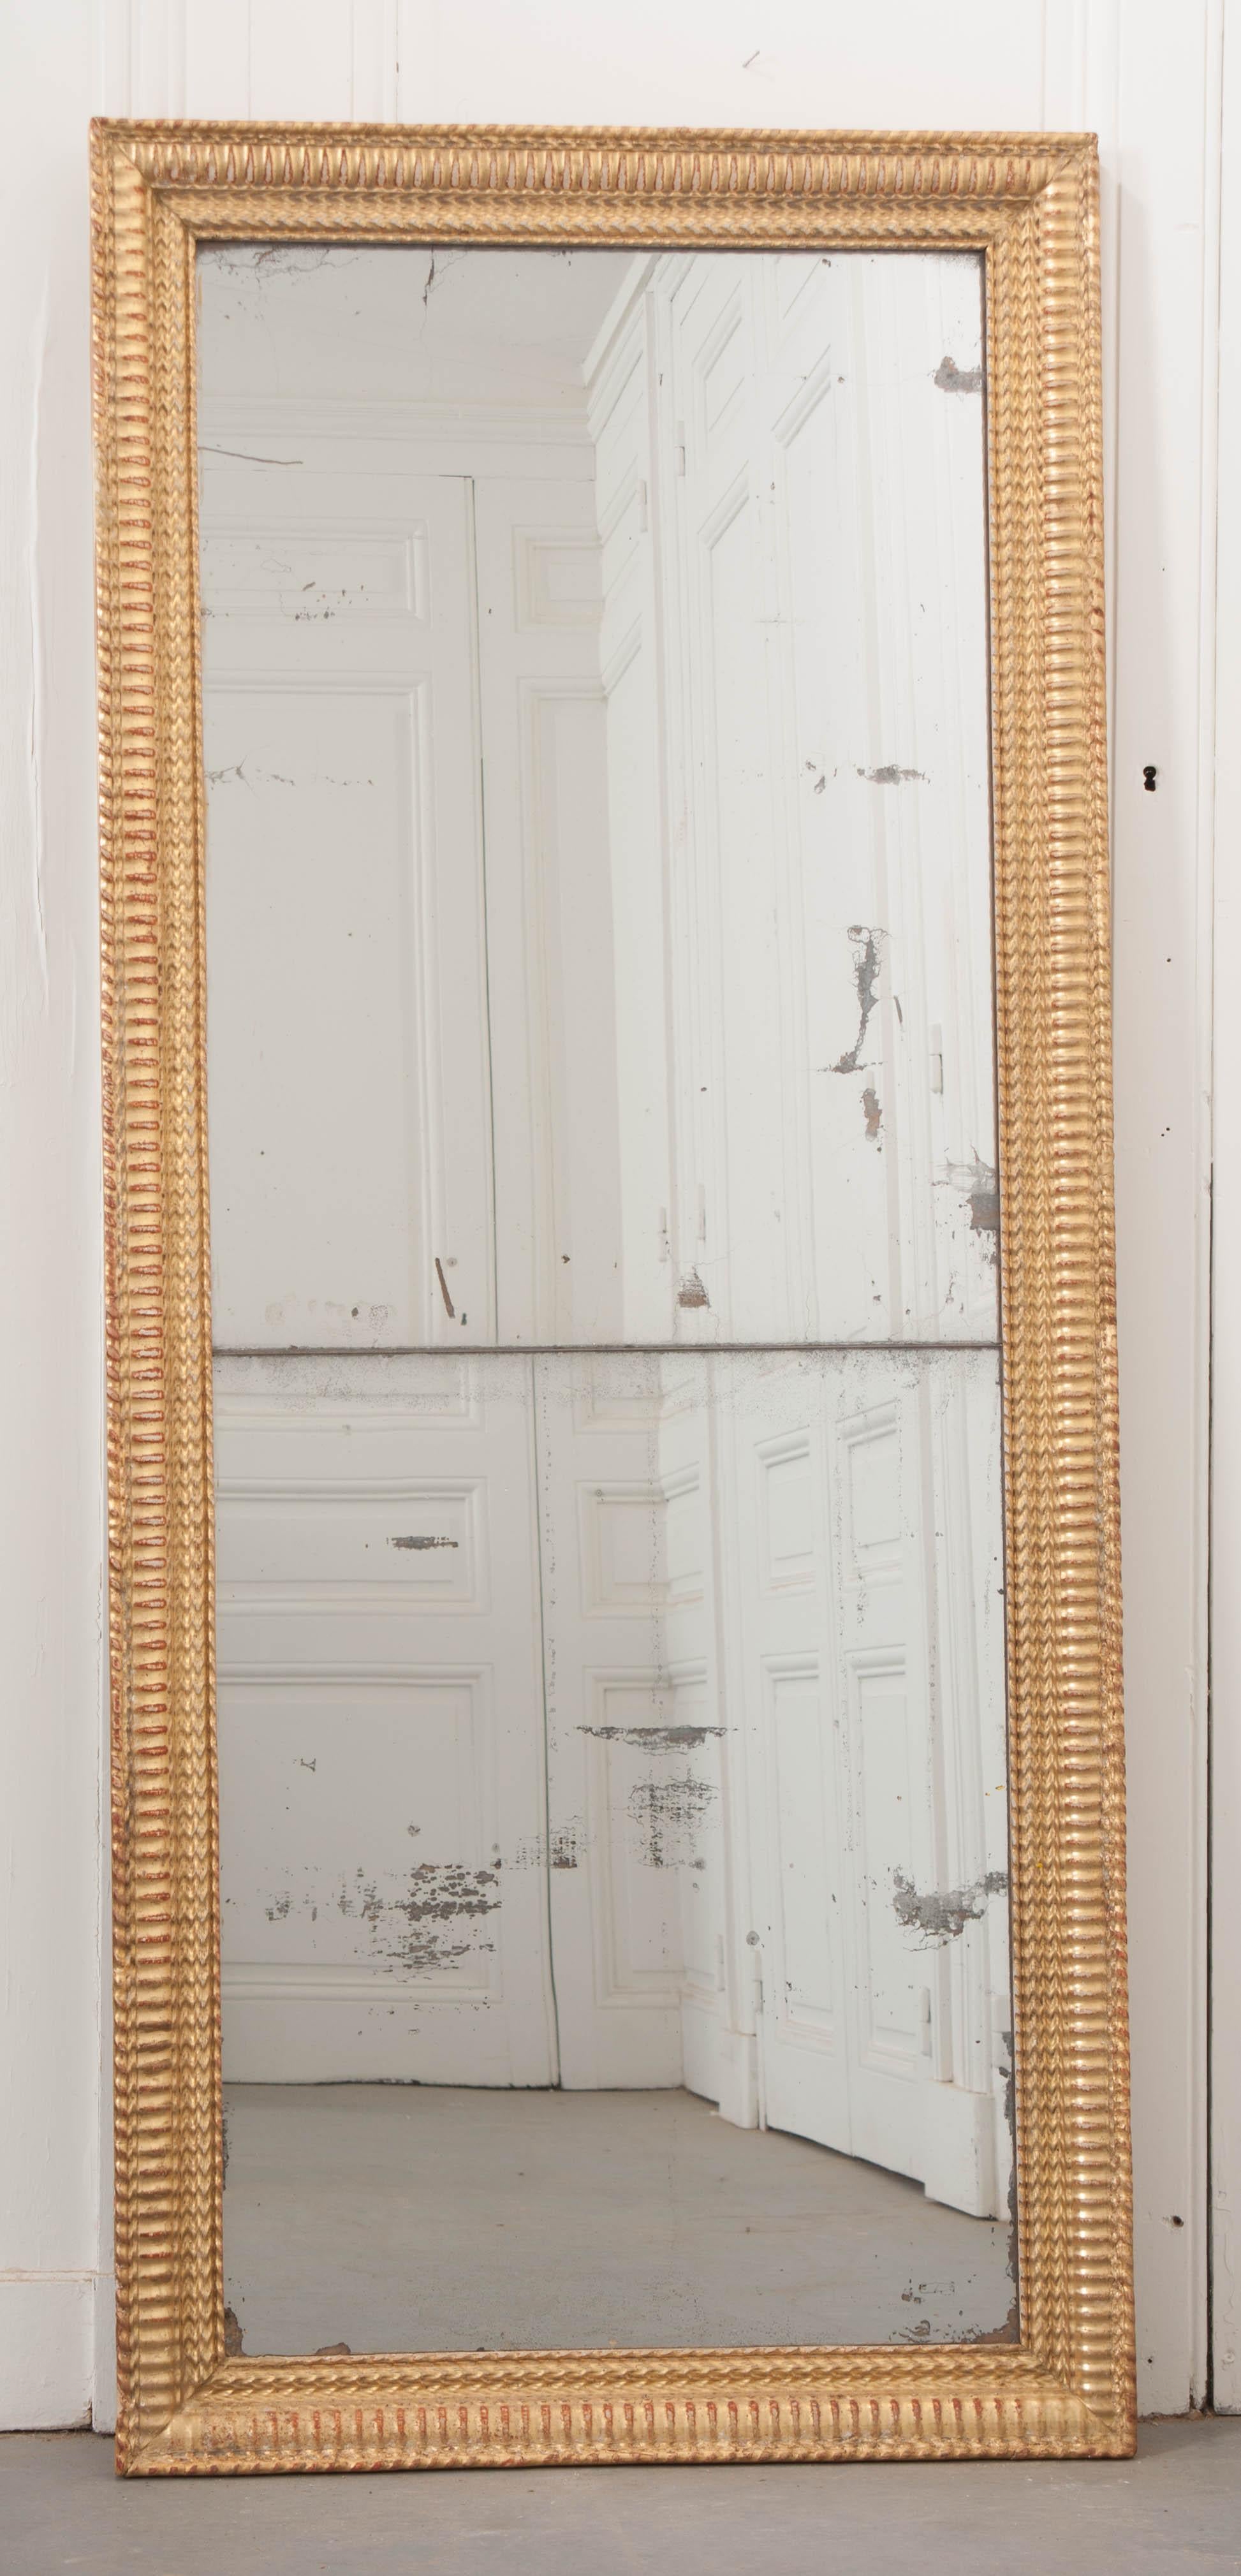 A tall and narrow gold gilt mirror from 19th century France. The mirror’s rectangular frame has a special design, with ribbed and running-chevron motifs finished in brilliant gold gilt. The frame has some French red that is visible from behind the